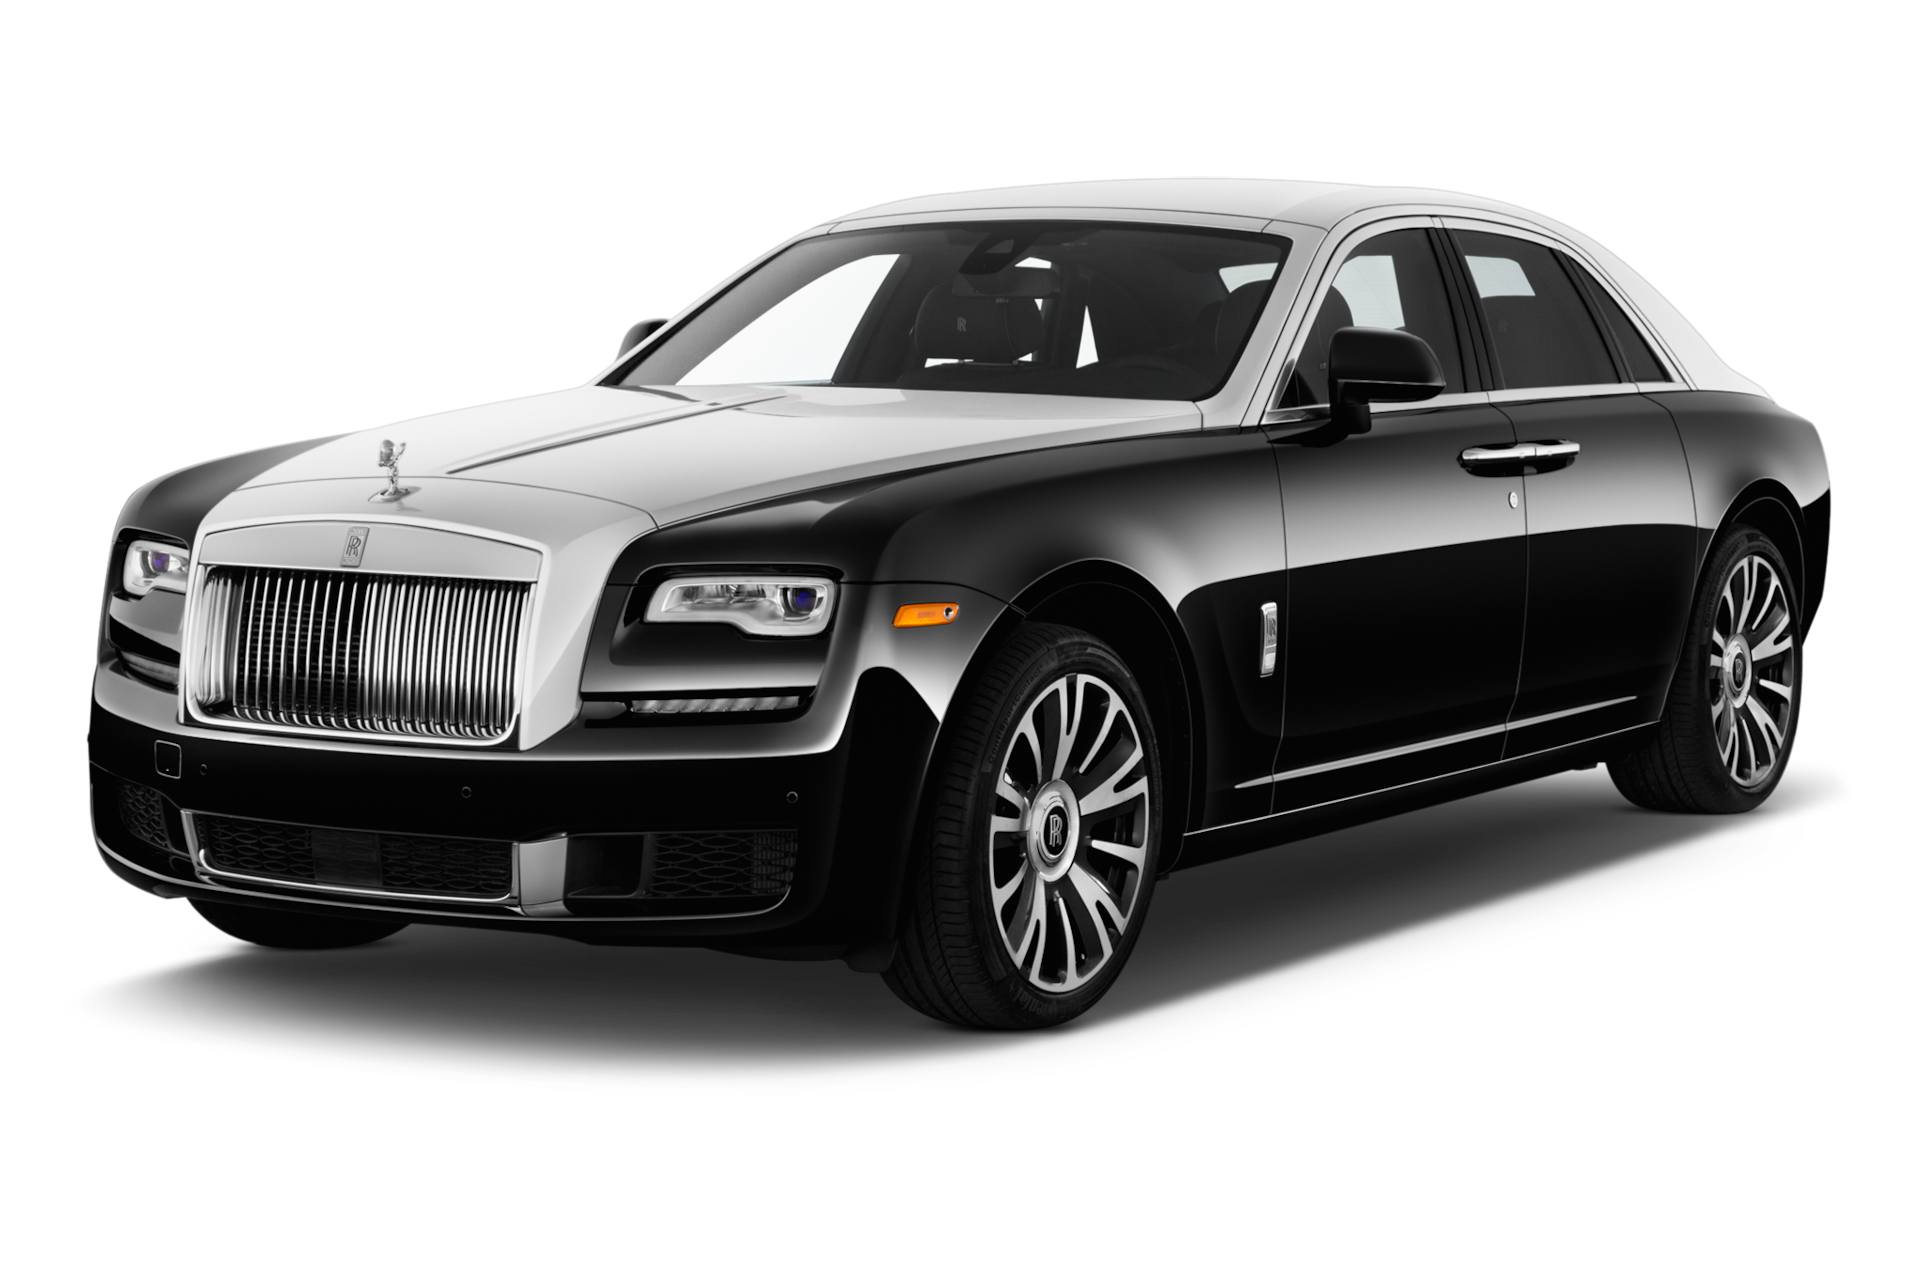 2017 Rolls-Royce Ghost Prices, Reviews, and Photos - MotorTrend